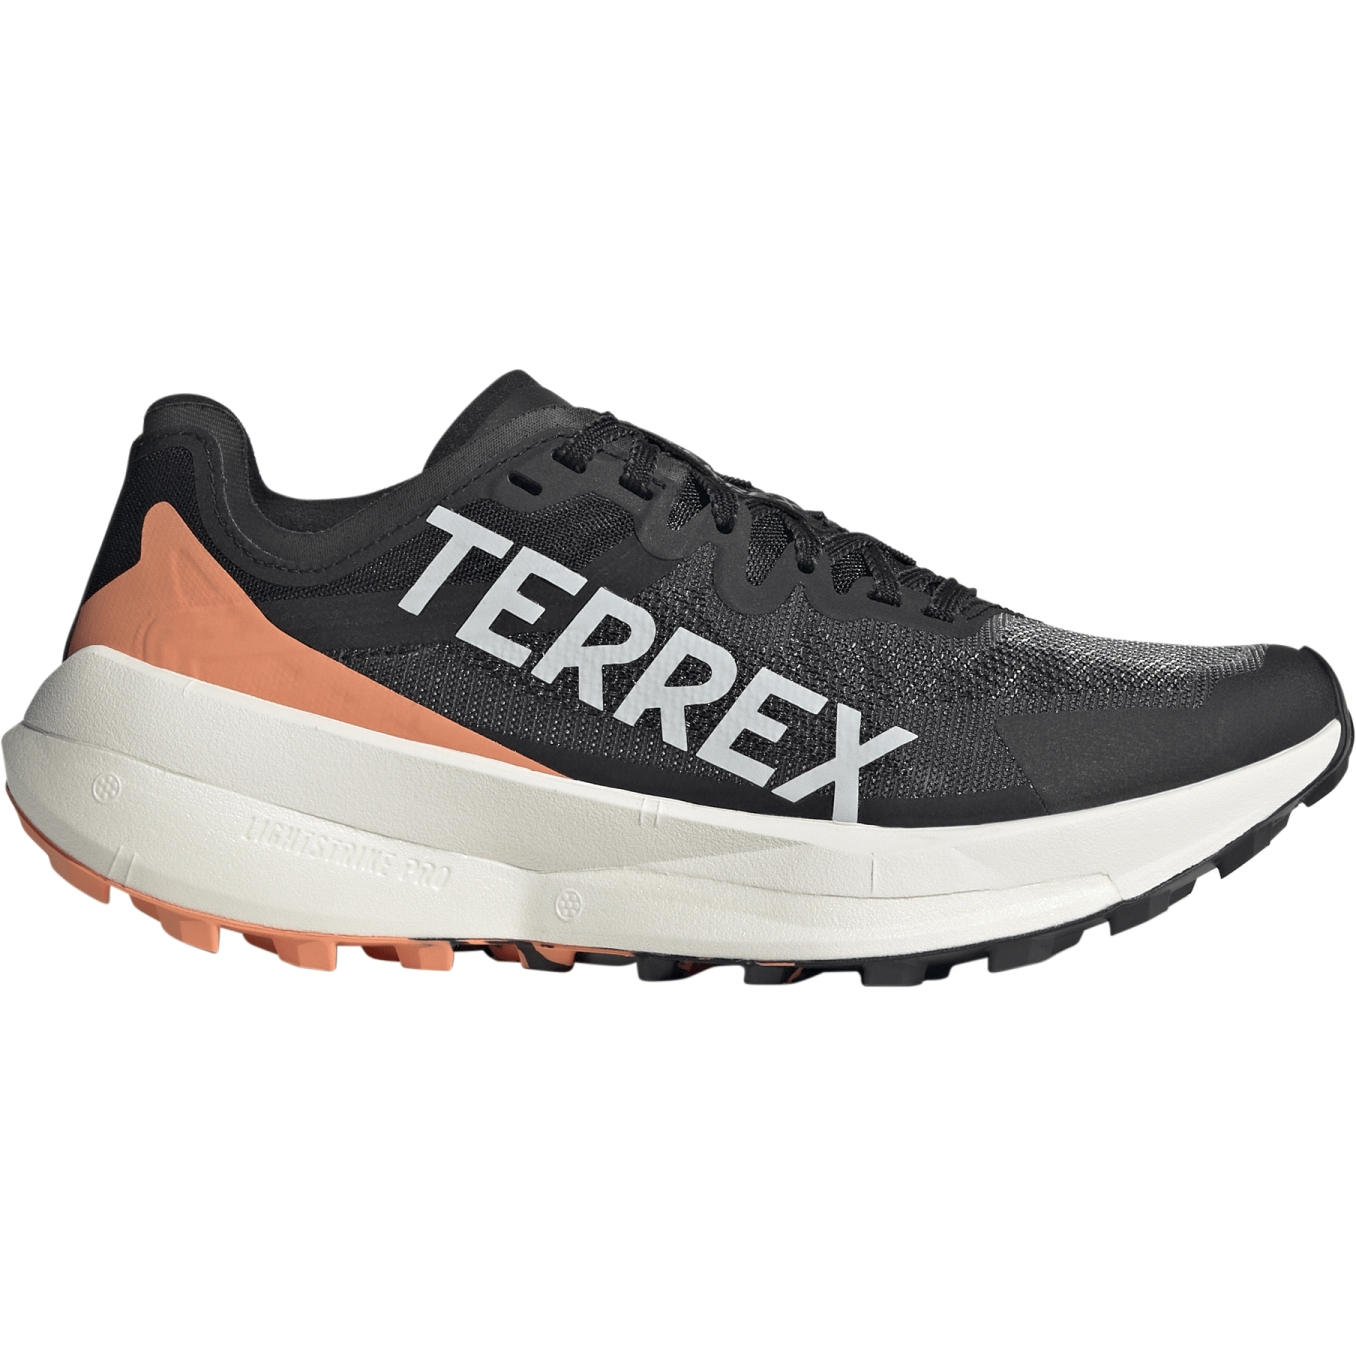 Picture of adidas TERREX Agravic Speed Trailrunning Shoes Women - core black/grey one/amber tint IE7671